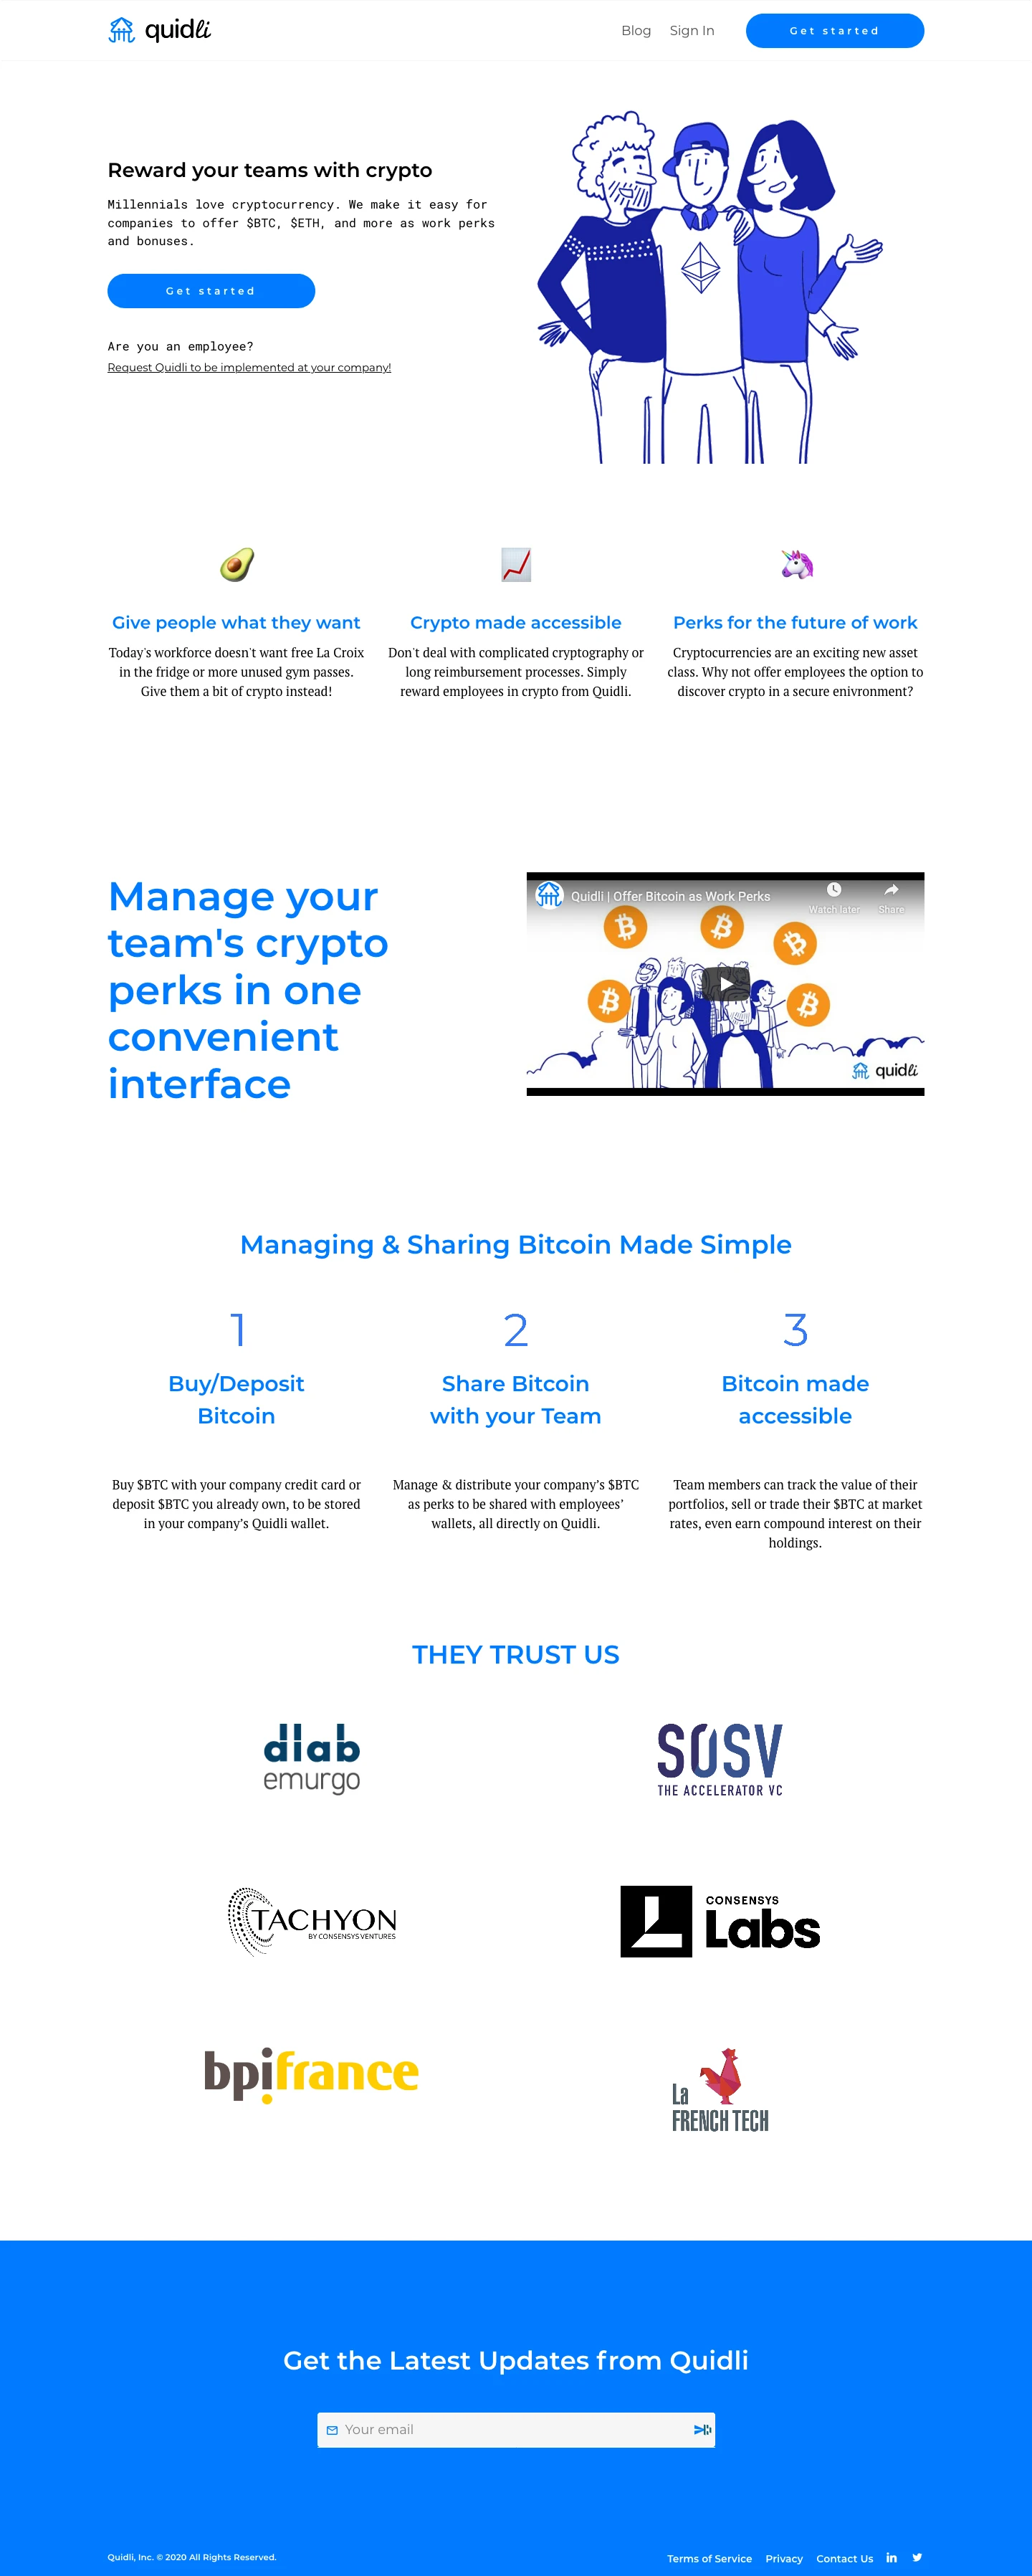 Quidli Landing Page Example: Reward your teams with cryptoMillennials love cryptocurrency. We make it easy for companies to offer $BTC, $ETH, and more as work perks and bonuses.